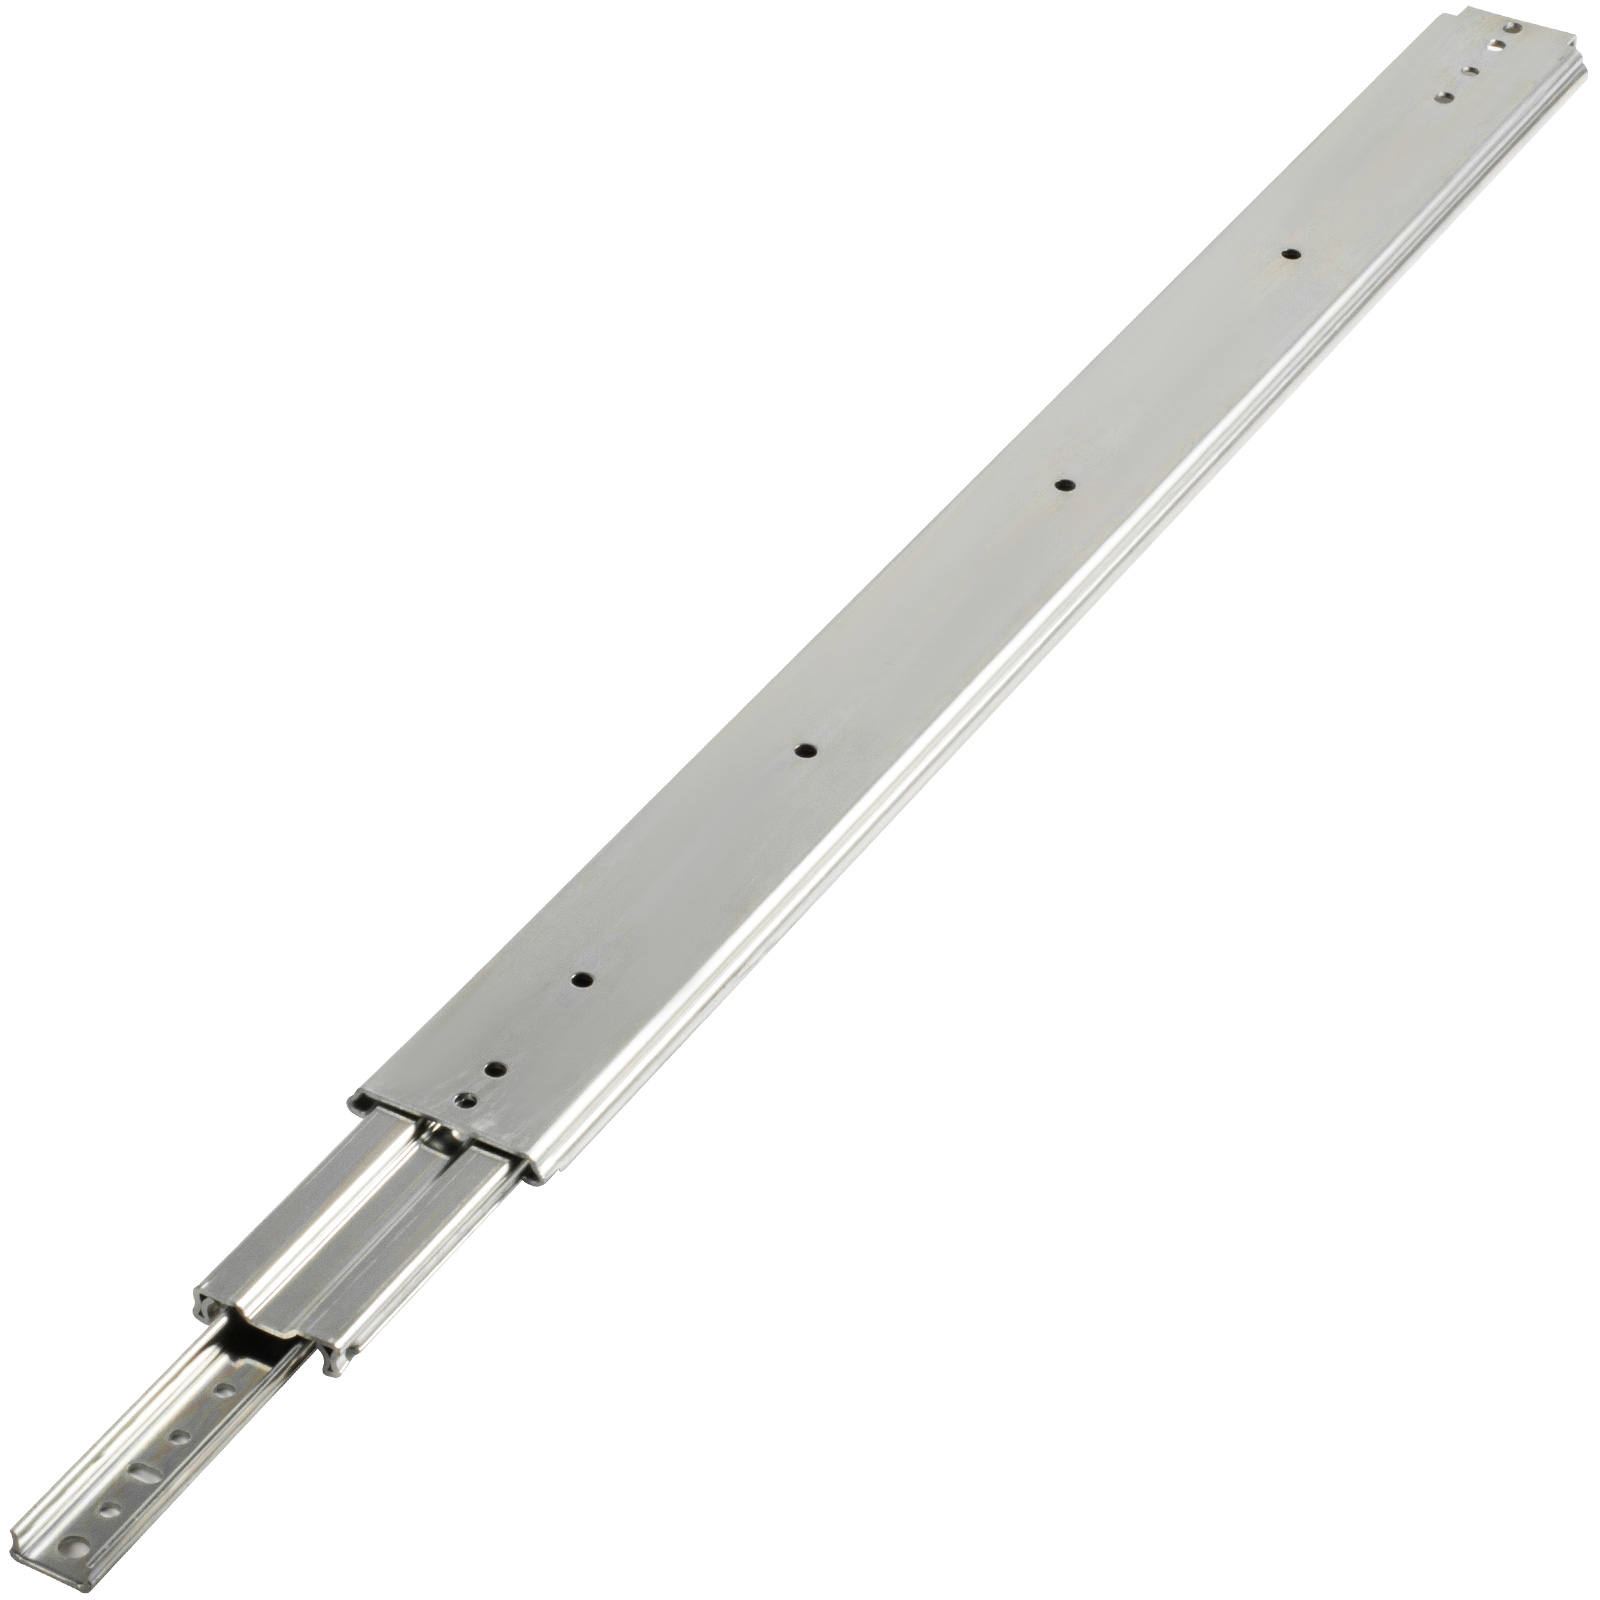 10" 60" Full Extension HeavyDuty Drawer Slides, Up to